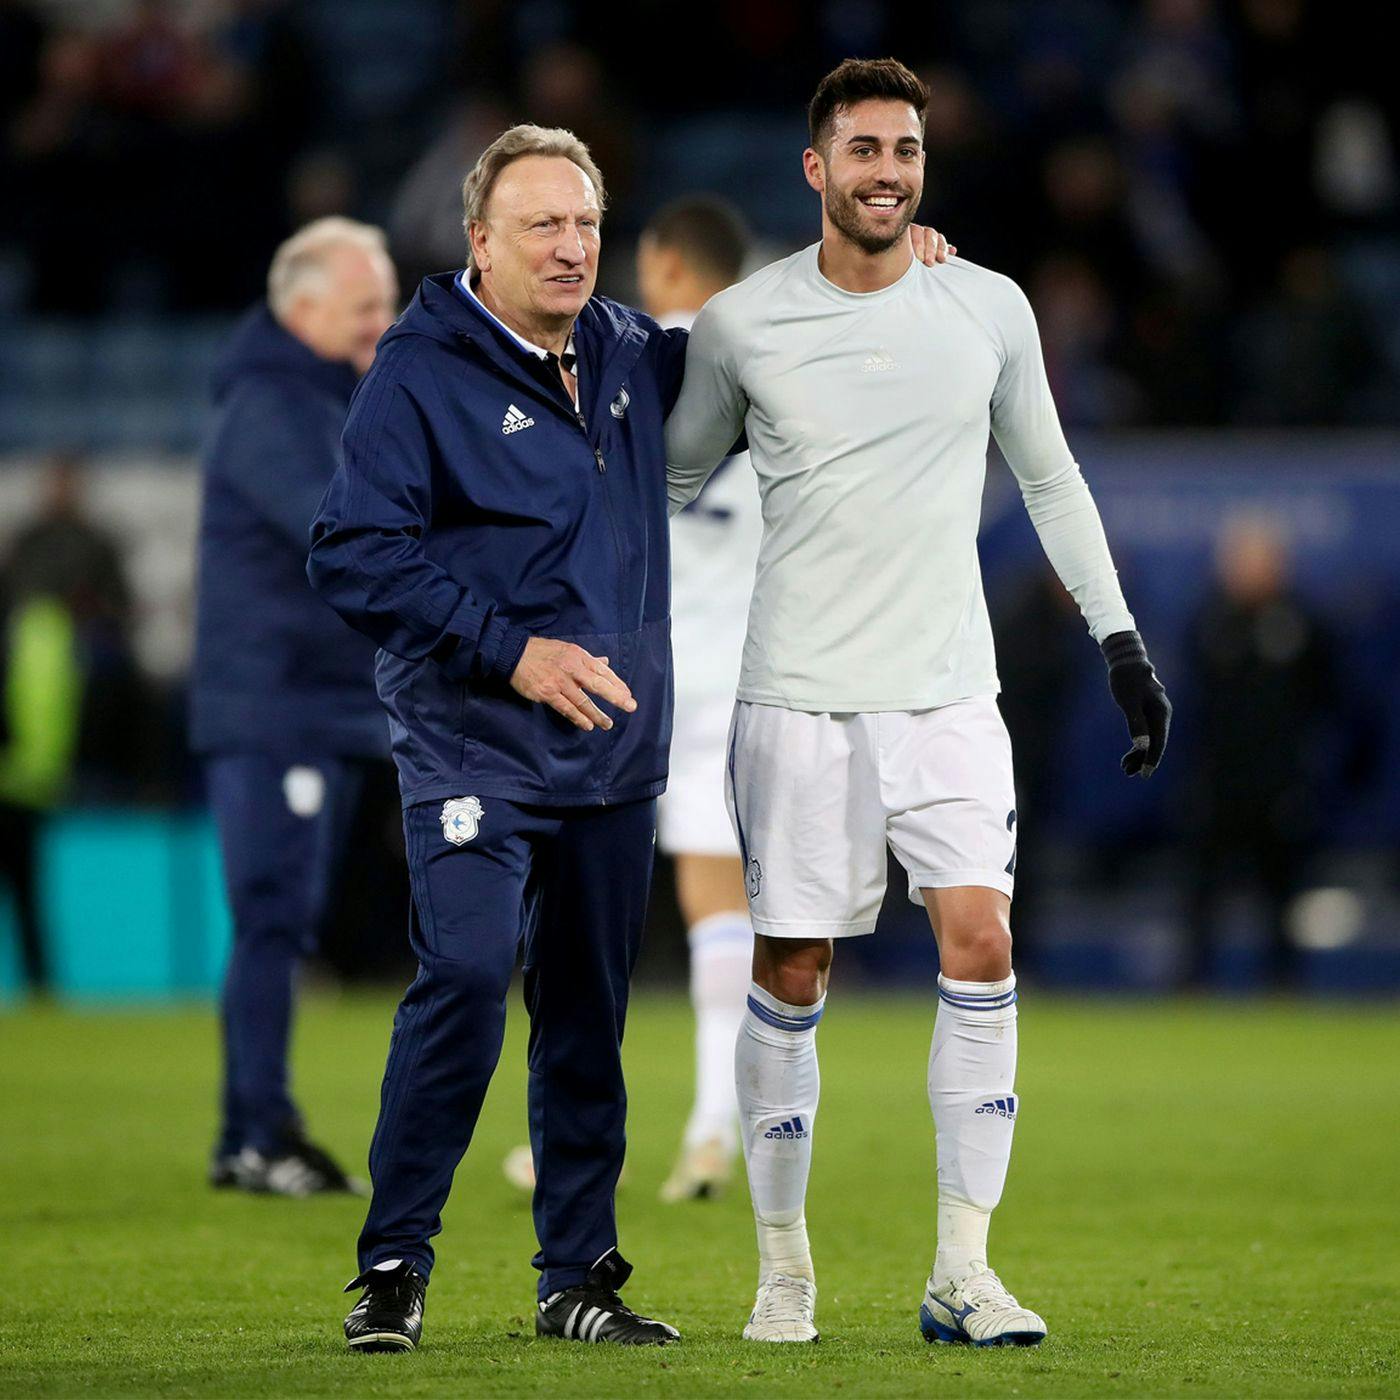 Cardiff City’s ’rotation’ problem and our transfer ambitions